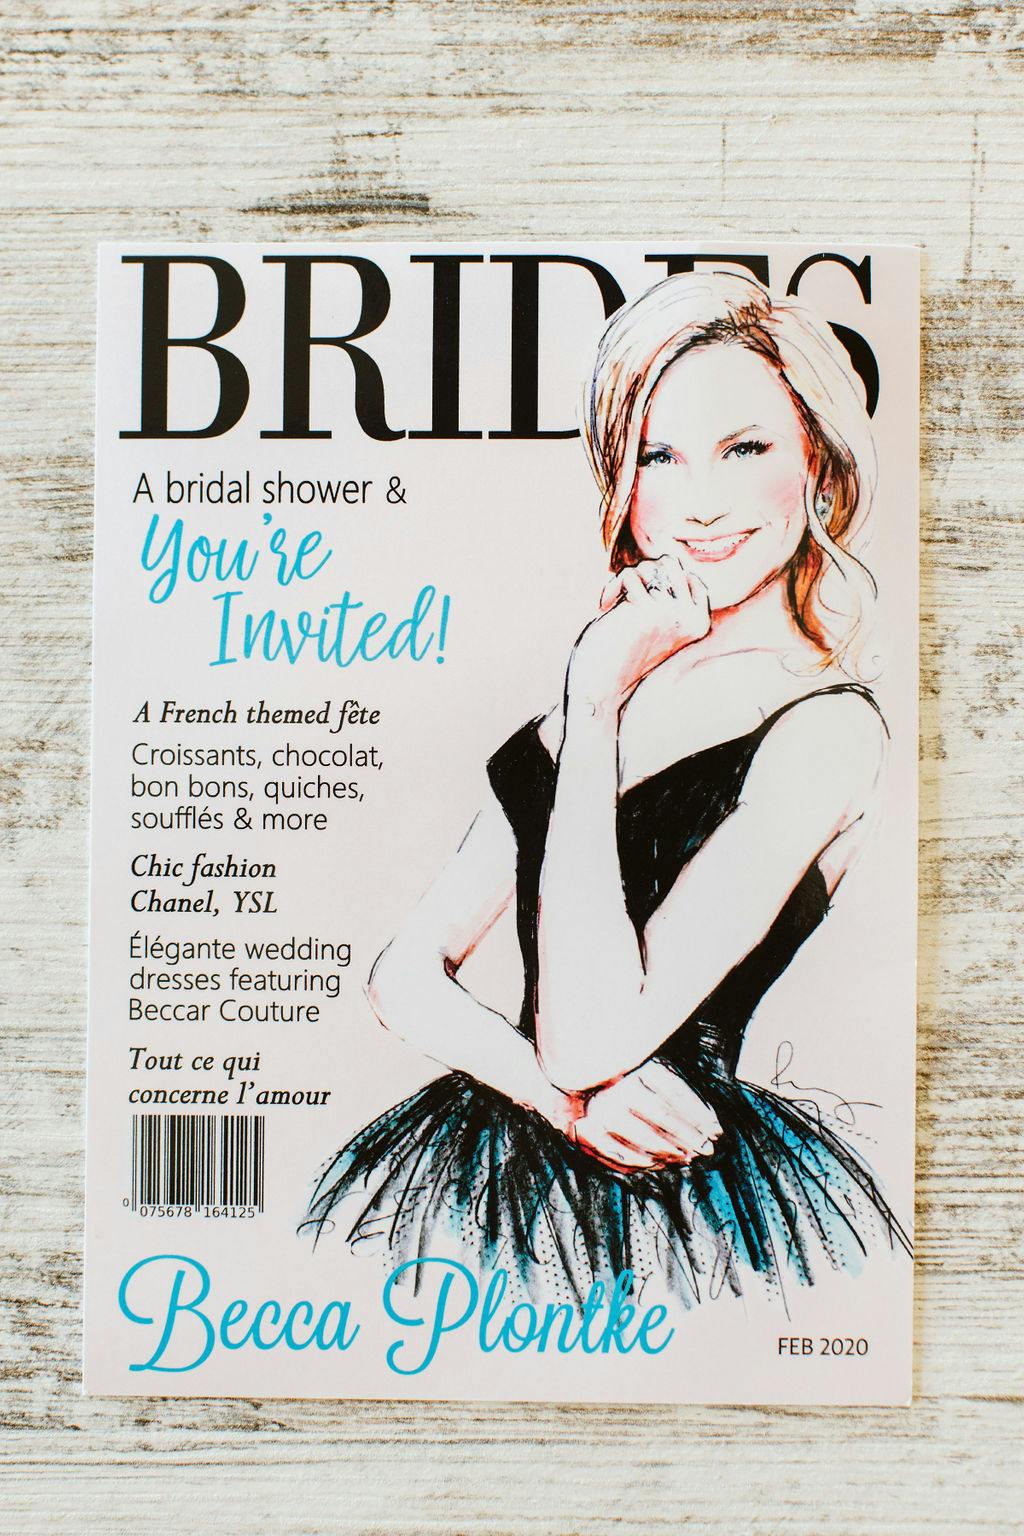 Paris & Coco Chanel Inspired Bridal Shower